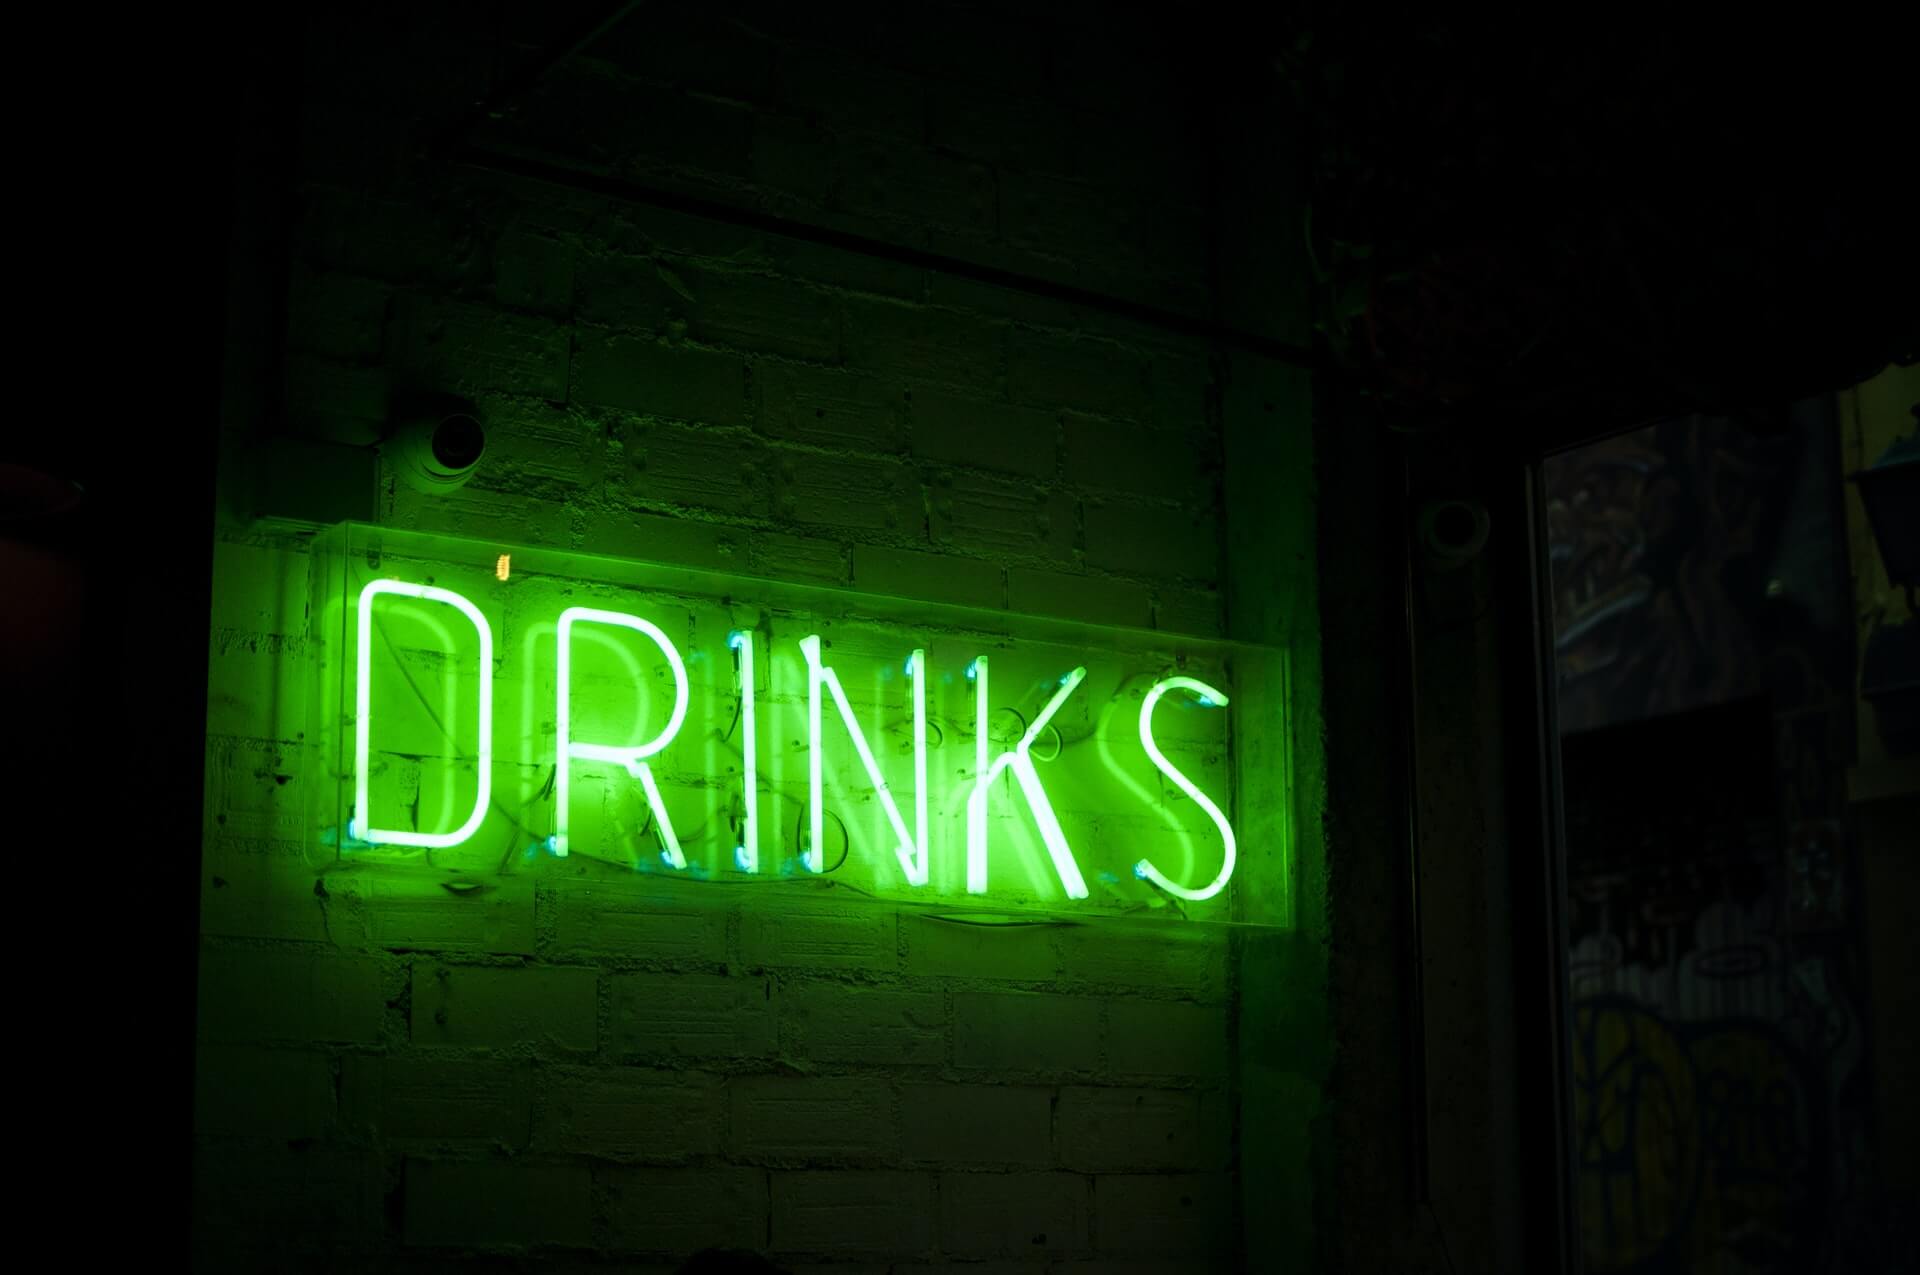 Green neon "DRINKS" sign on brick wall